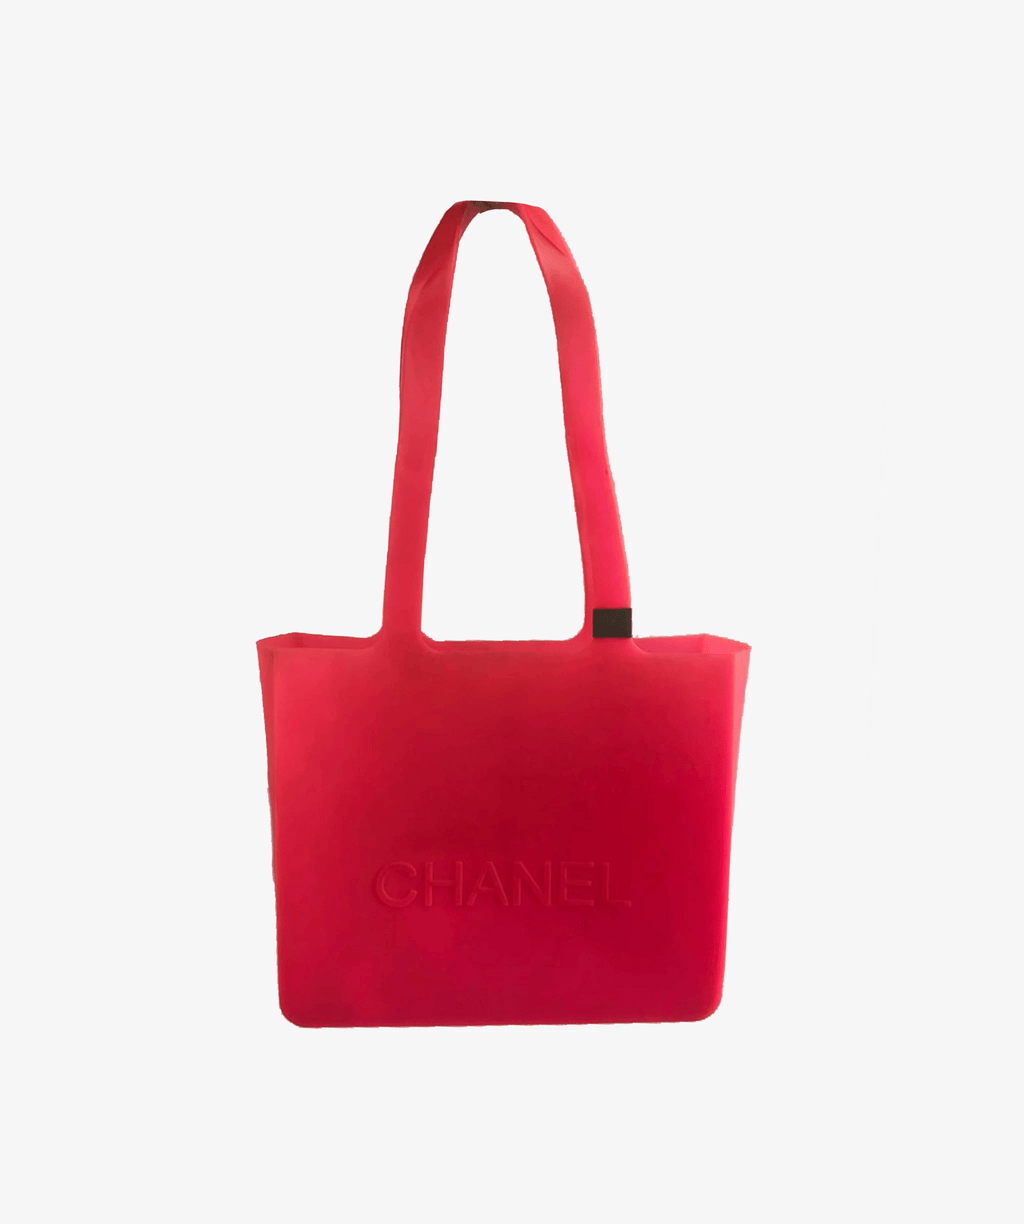 Chanel pink rubber tote bag – LuxuryPromise